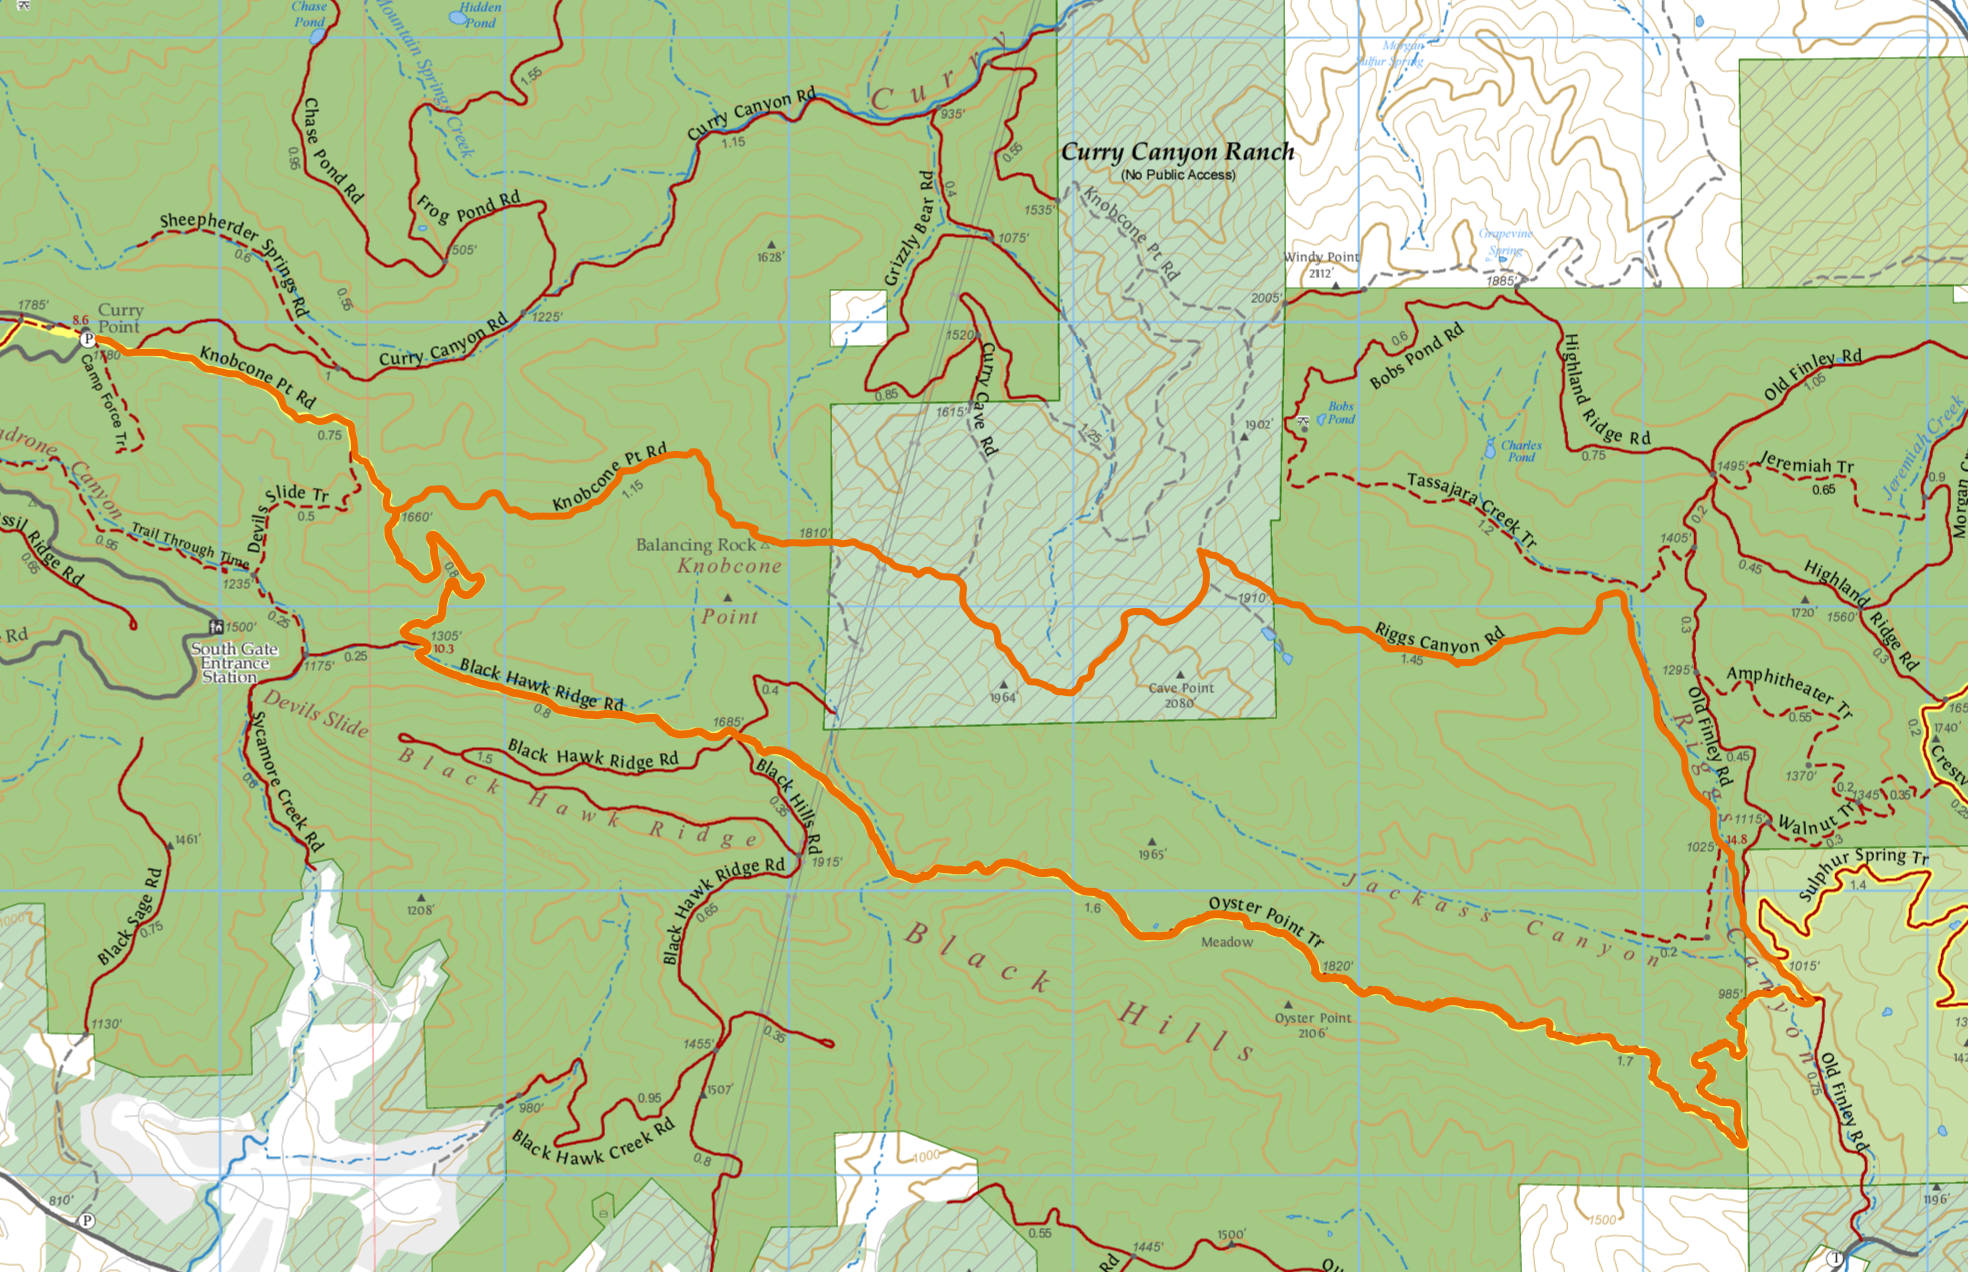 A highlighted trail map of the Curry Point Loop that runs from Knobcone Point Trail along the Curry Canyon property through to Riggs Canyon and along the Oyster Point Trail before heading back to Curry Point via Black Hawk Ridge Road.